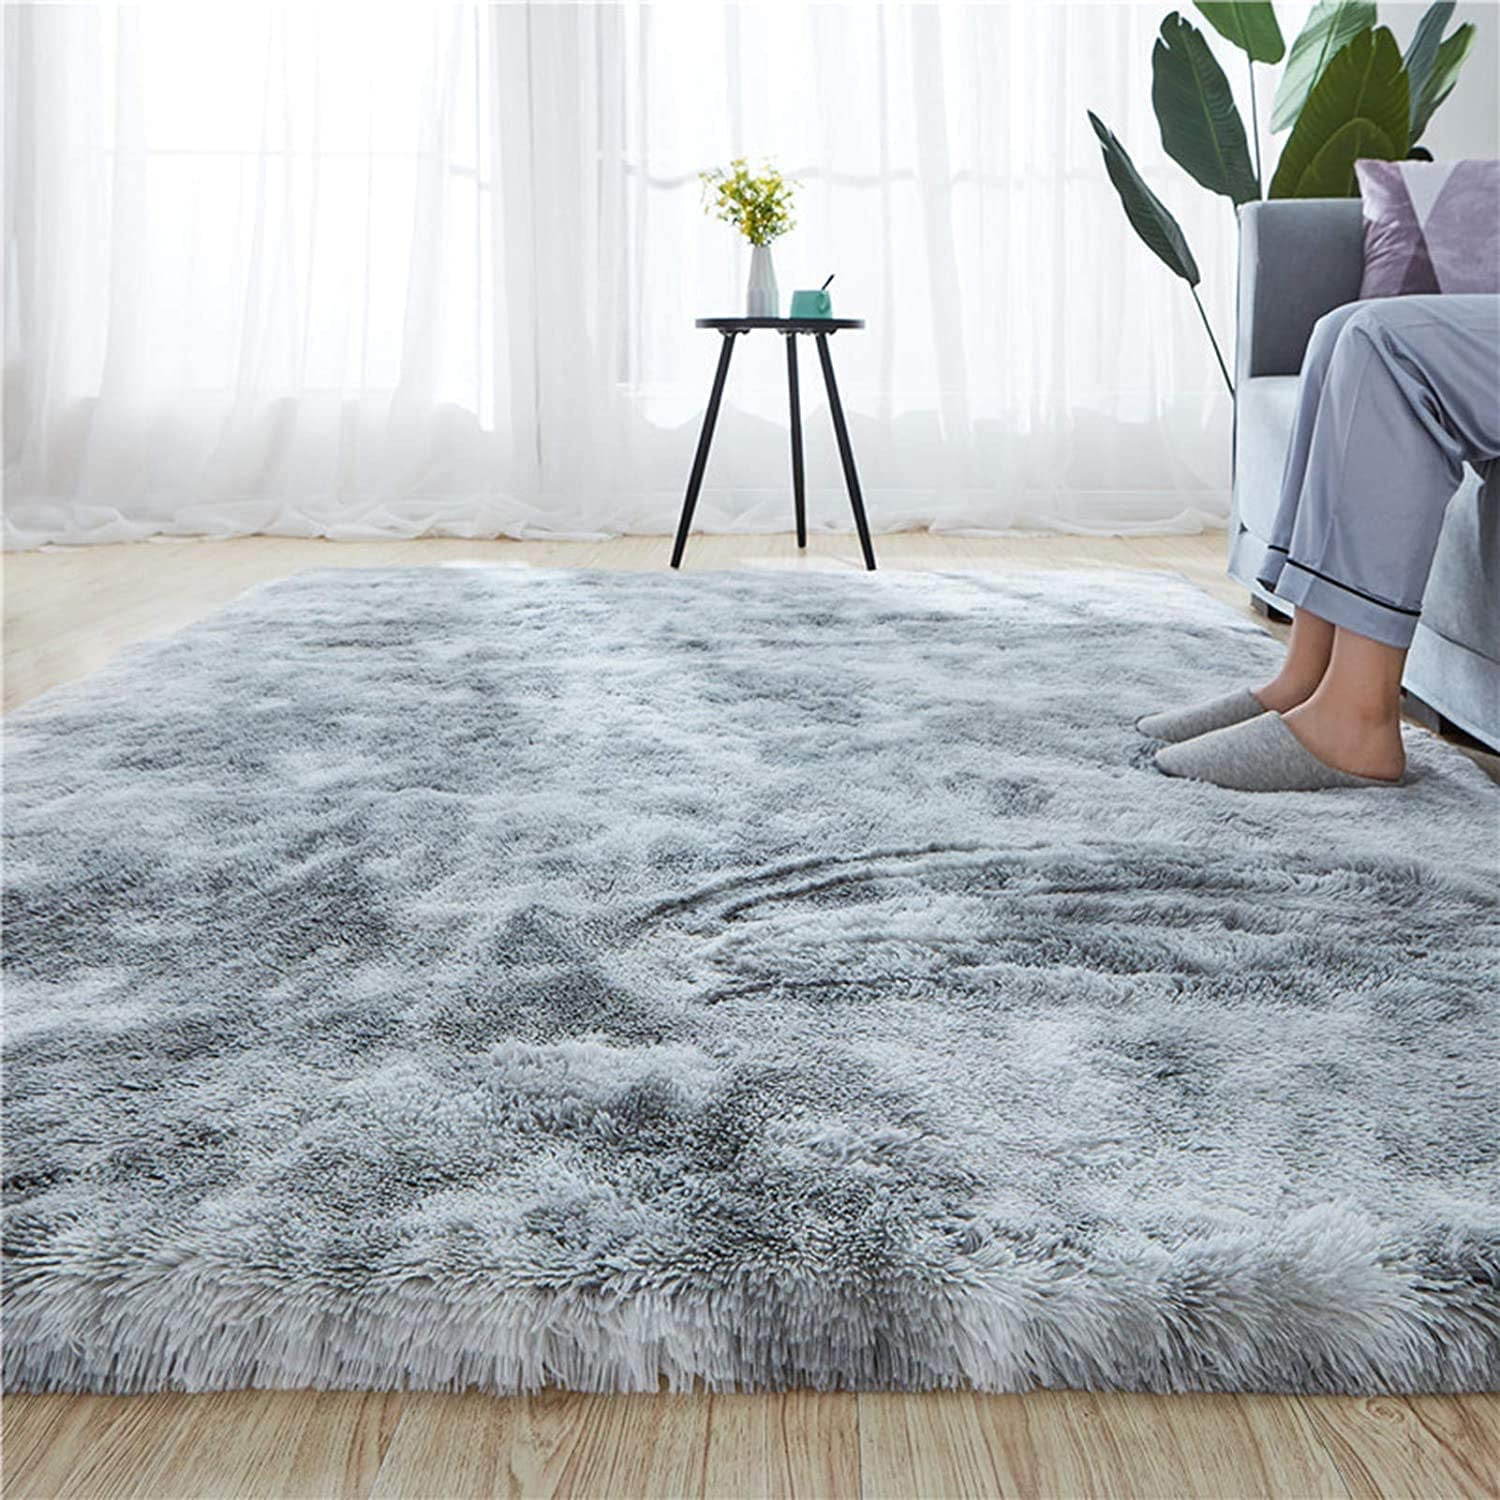 Rainlin Luxury Shag 4x6.7 Area Rug Modern Indoor Plush Fluffy Rugs Extra Soft and Comfy Carpet Home Decor Rectangle Rugs for Bedroom Living Room Girls Kids Nursery Classroom 